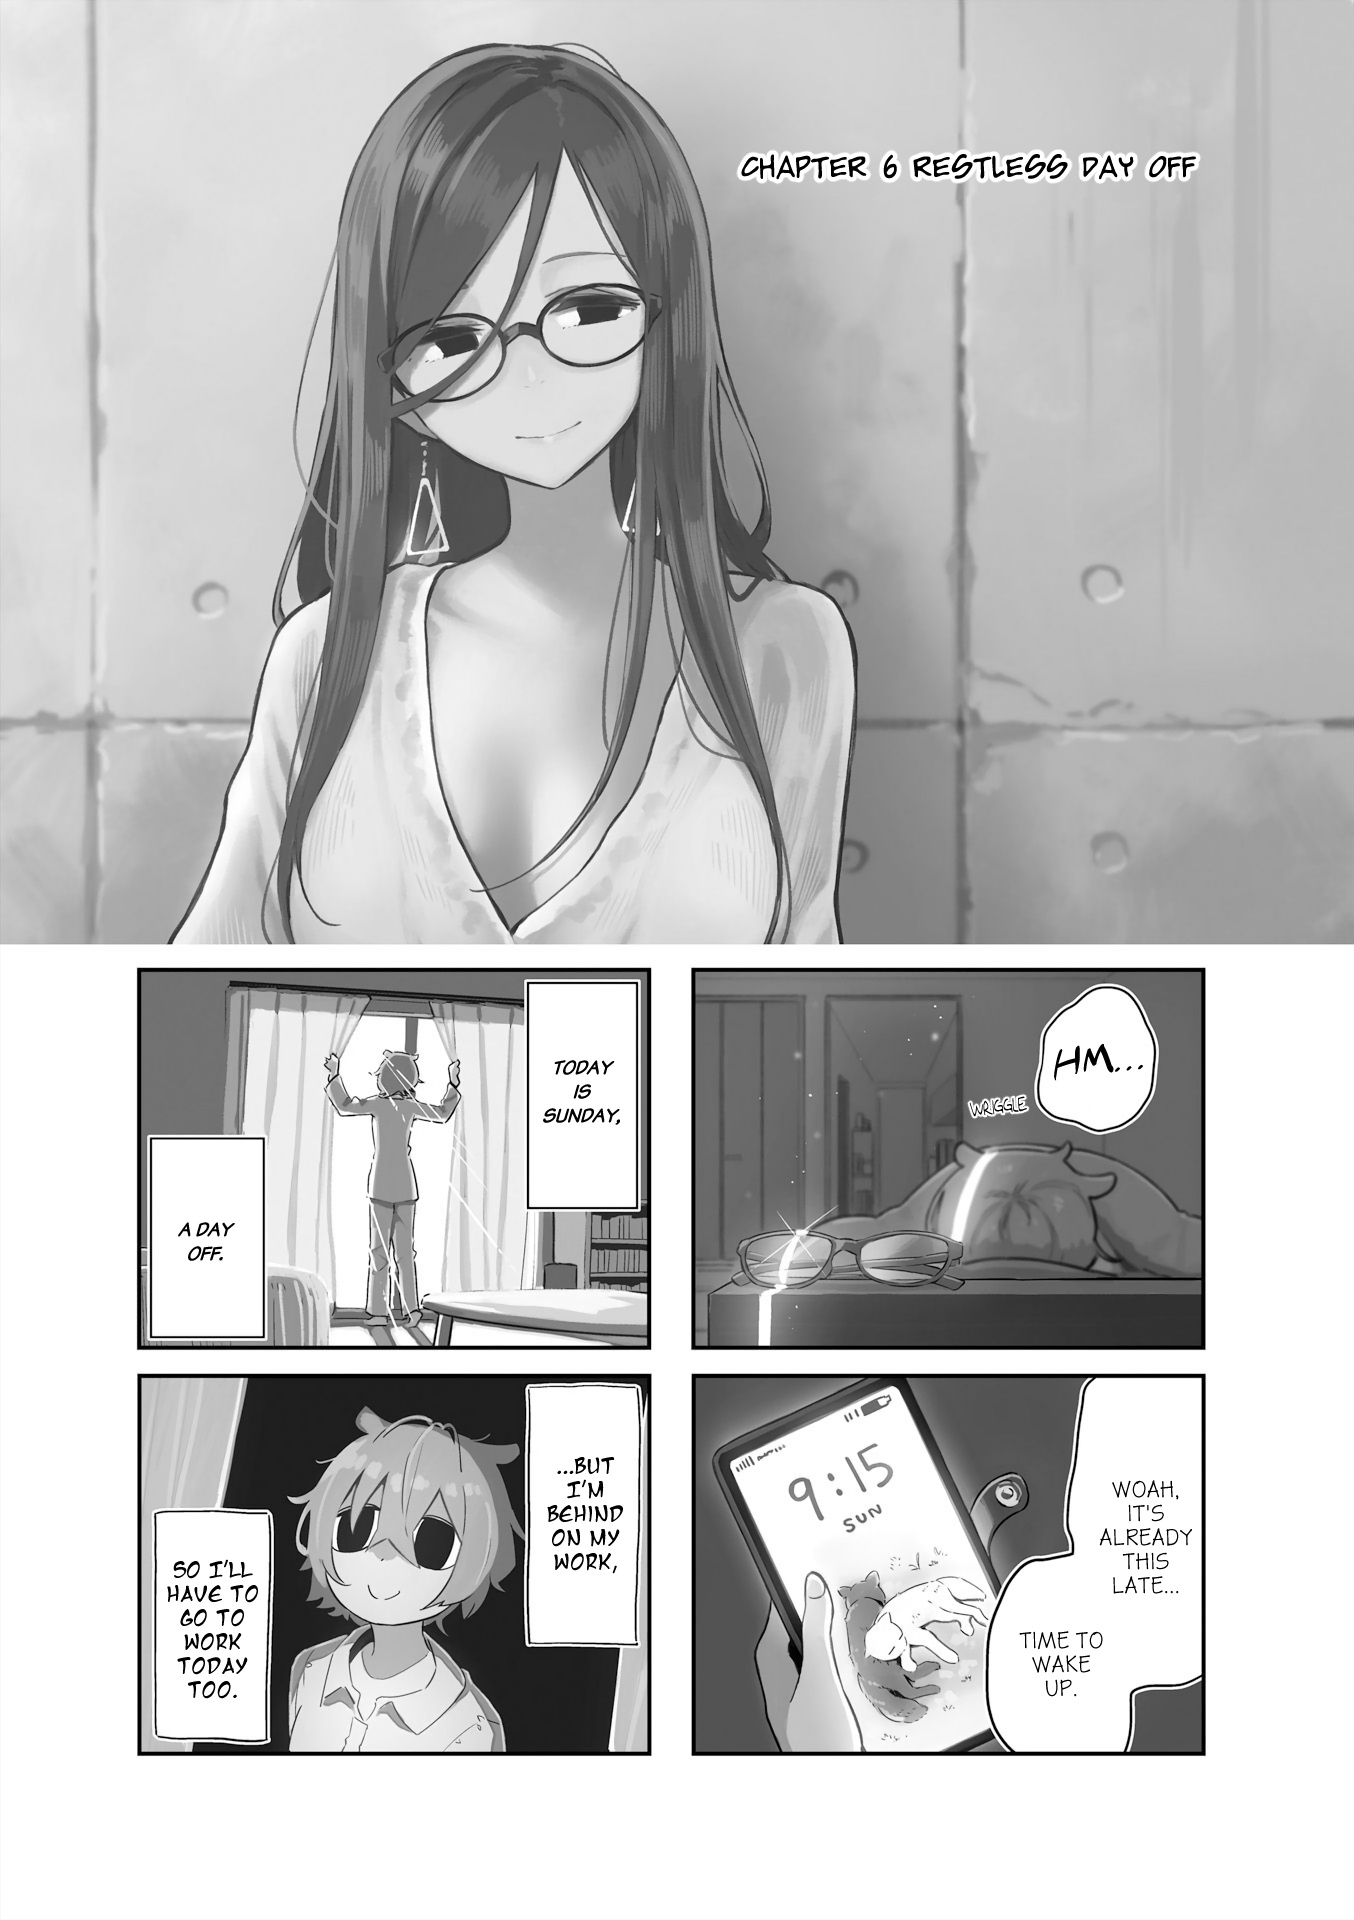 Hogushite, Yui-San Vol.1 Chapter 6: Restless Day Off - Picture 1